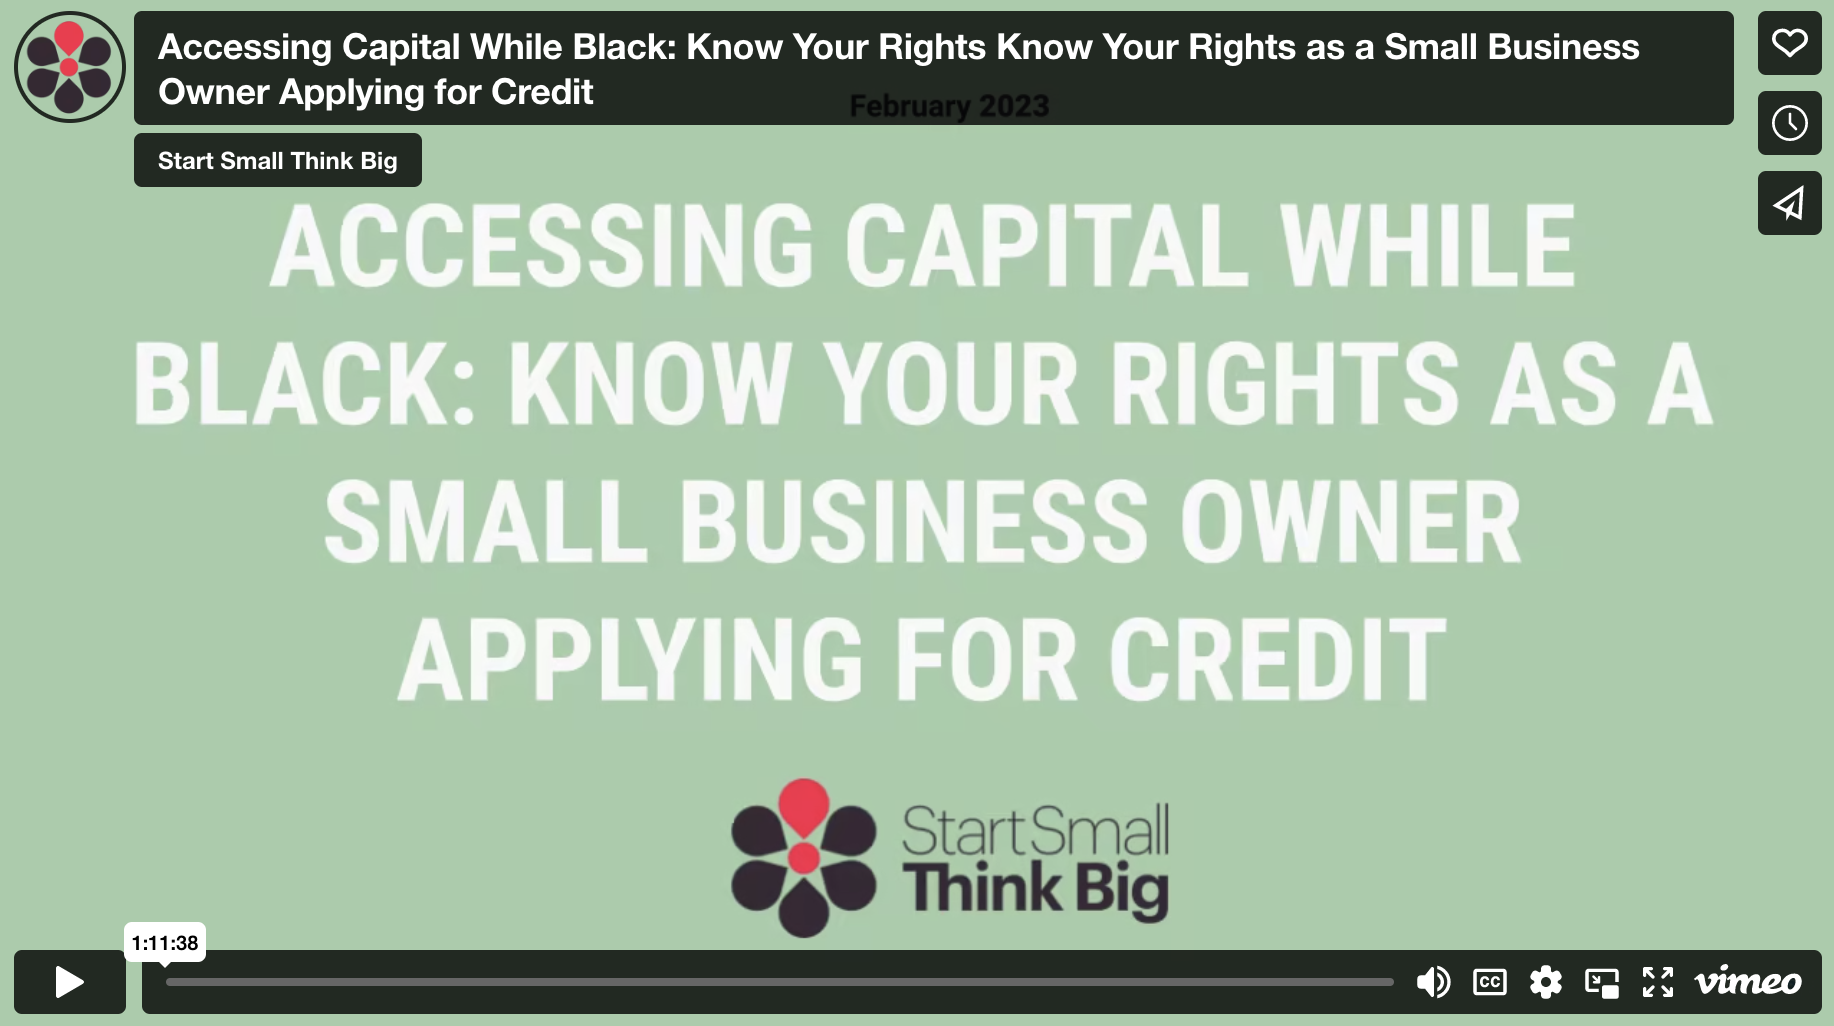 Know Your Rights Know Your Rights as a Small Business Owner Applying for Credit